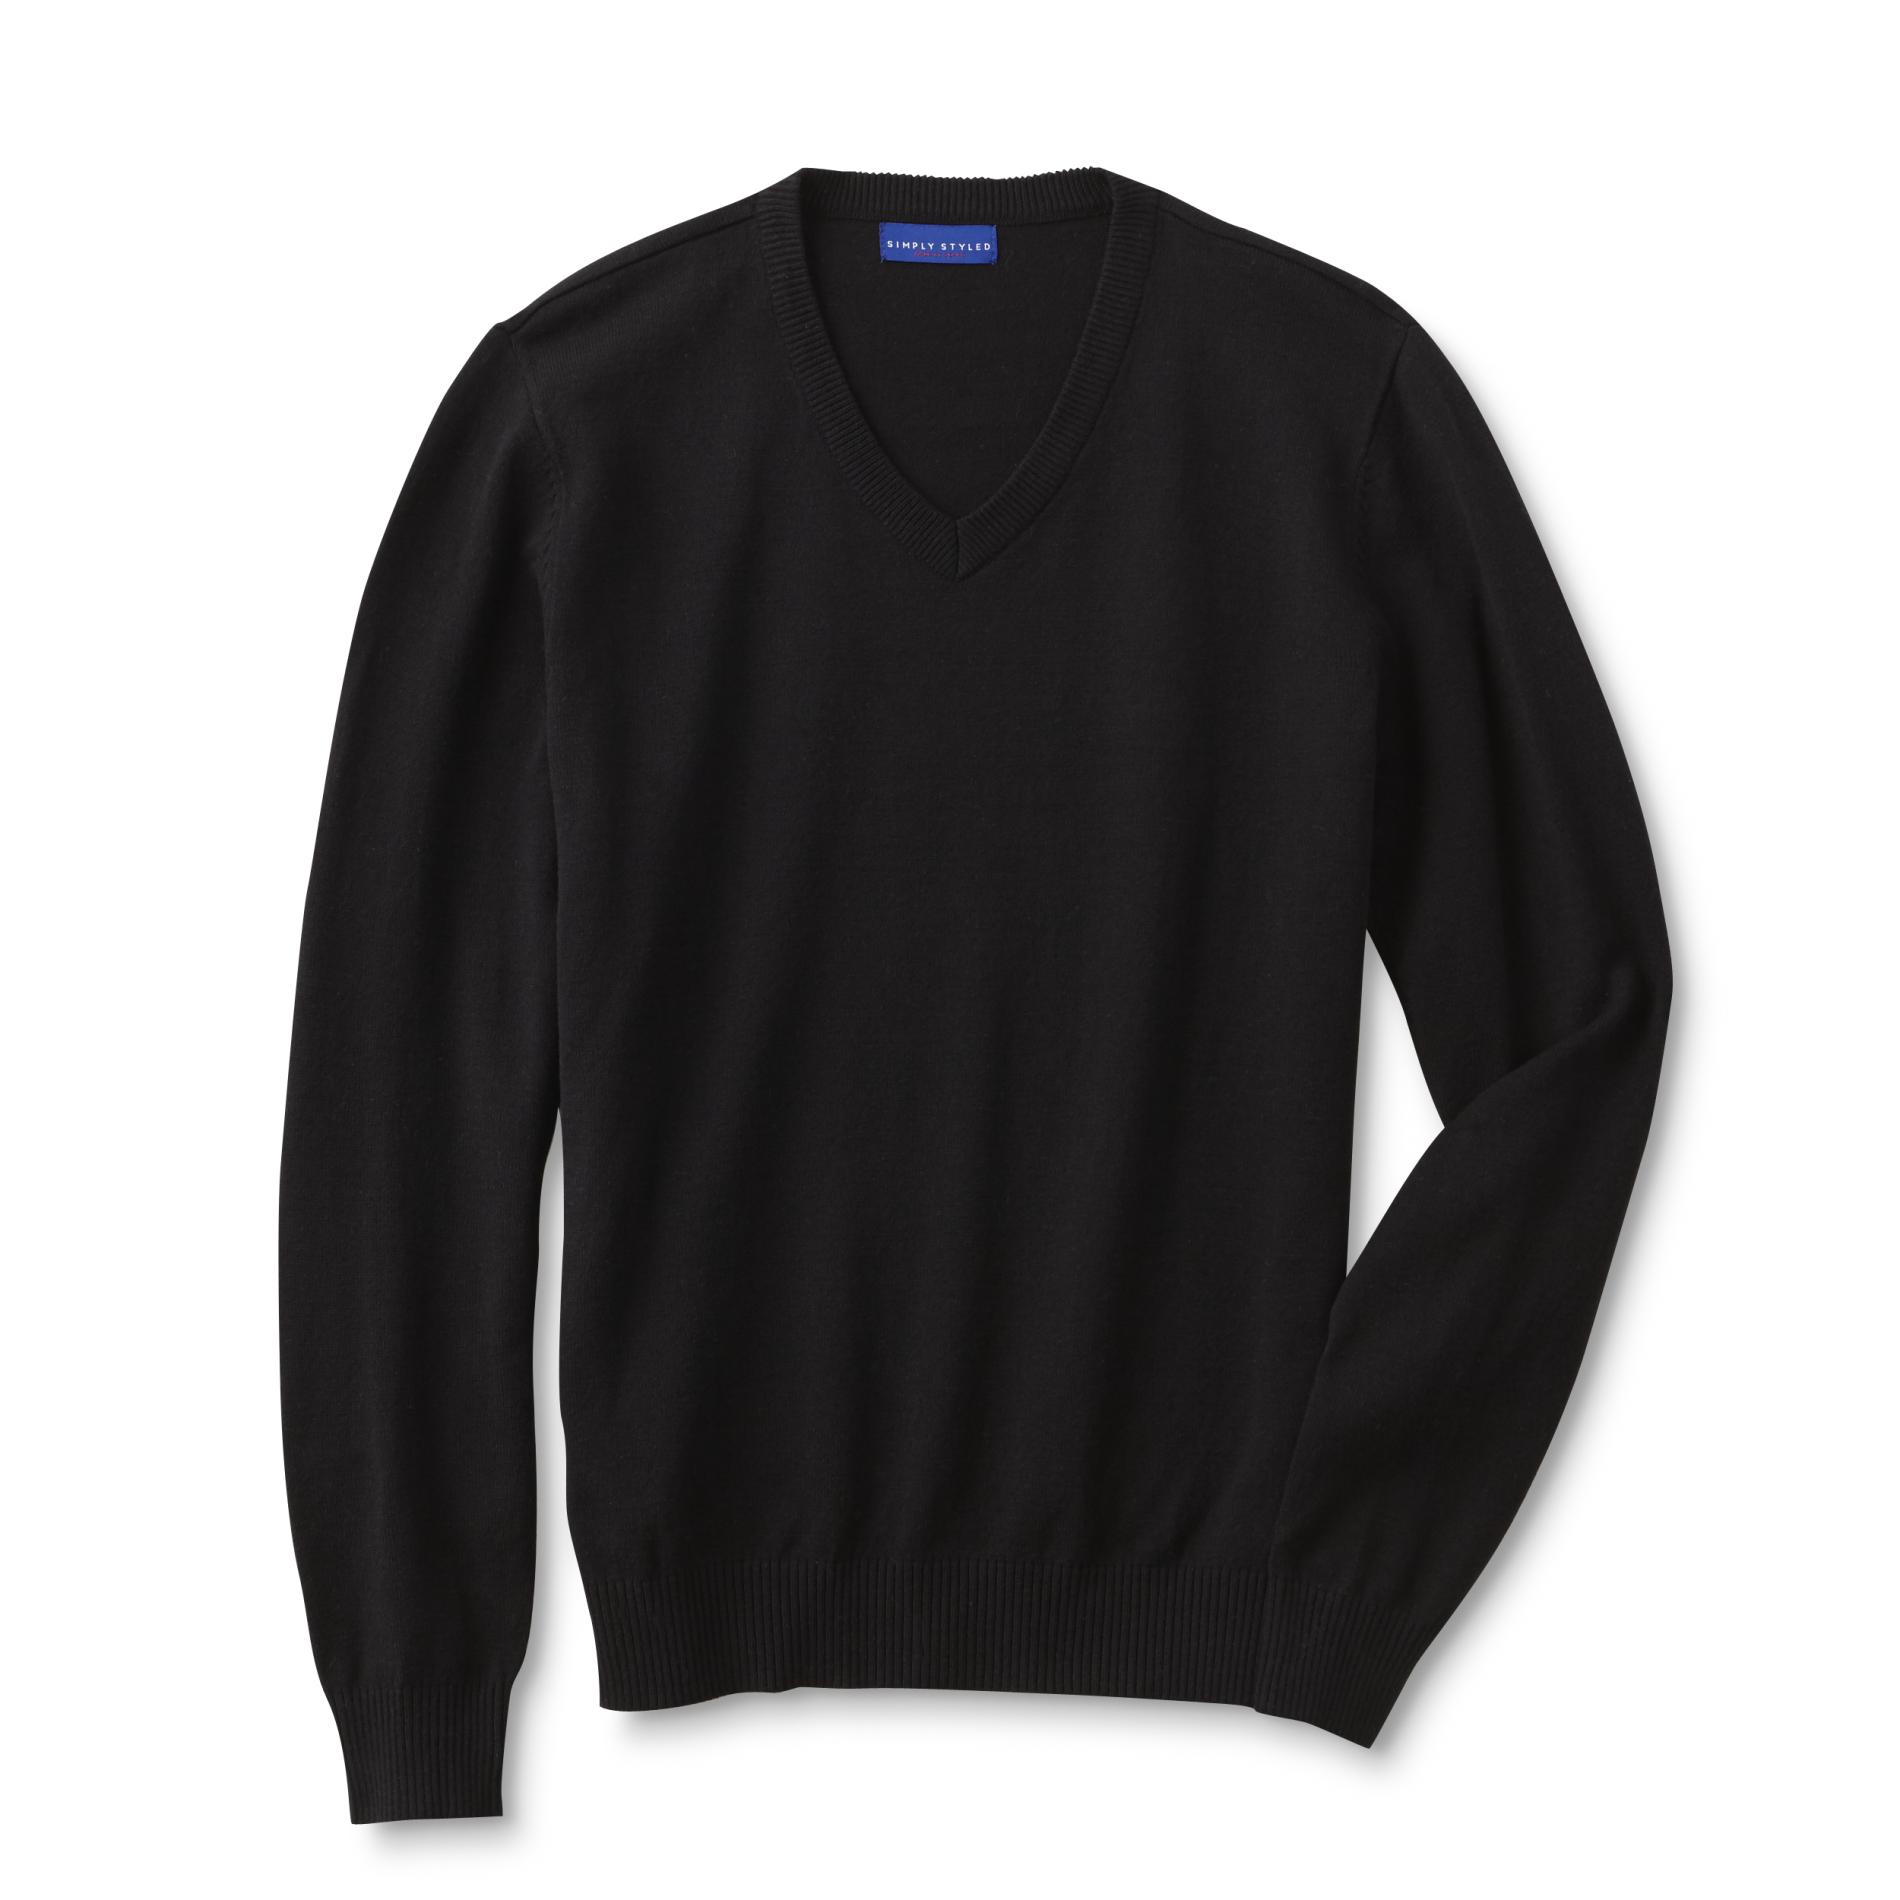 Simply Styled Men's V-Neck Sweater